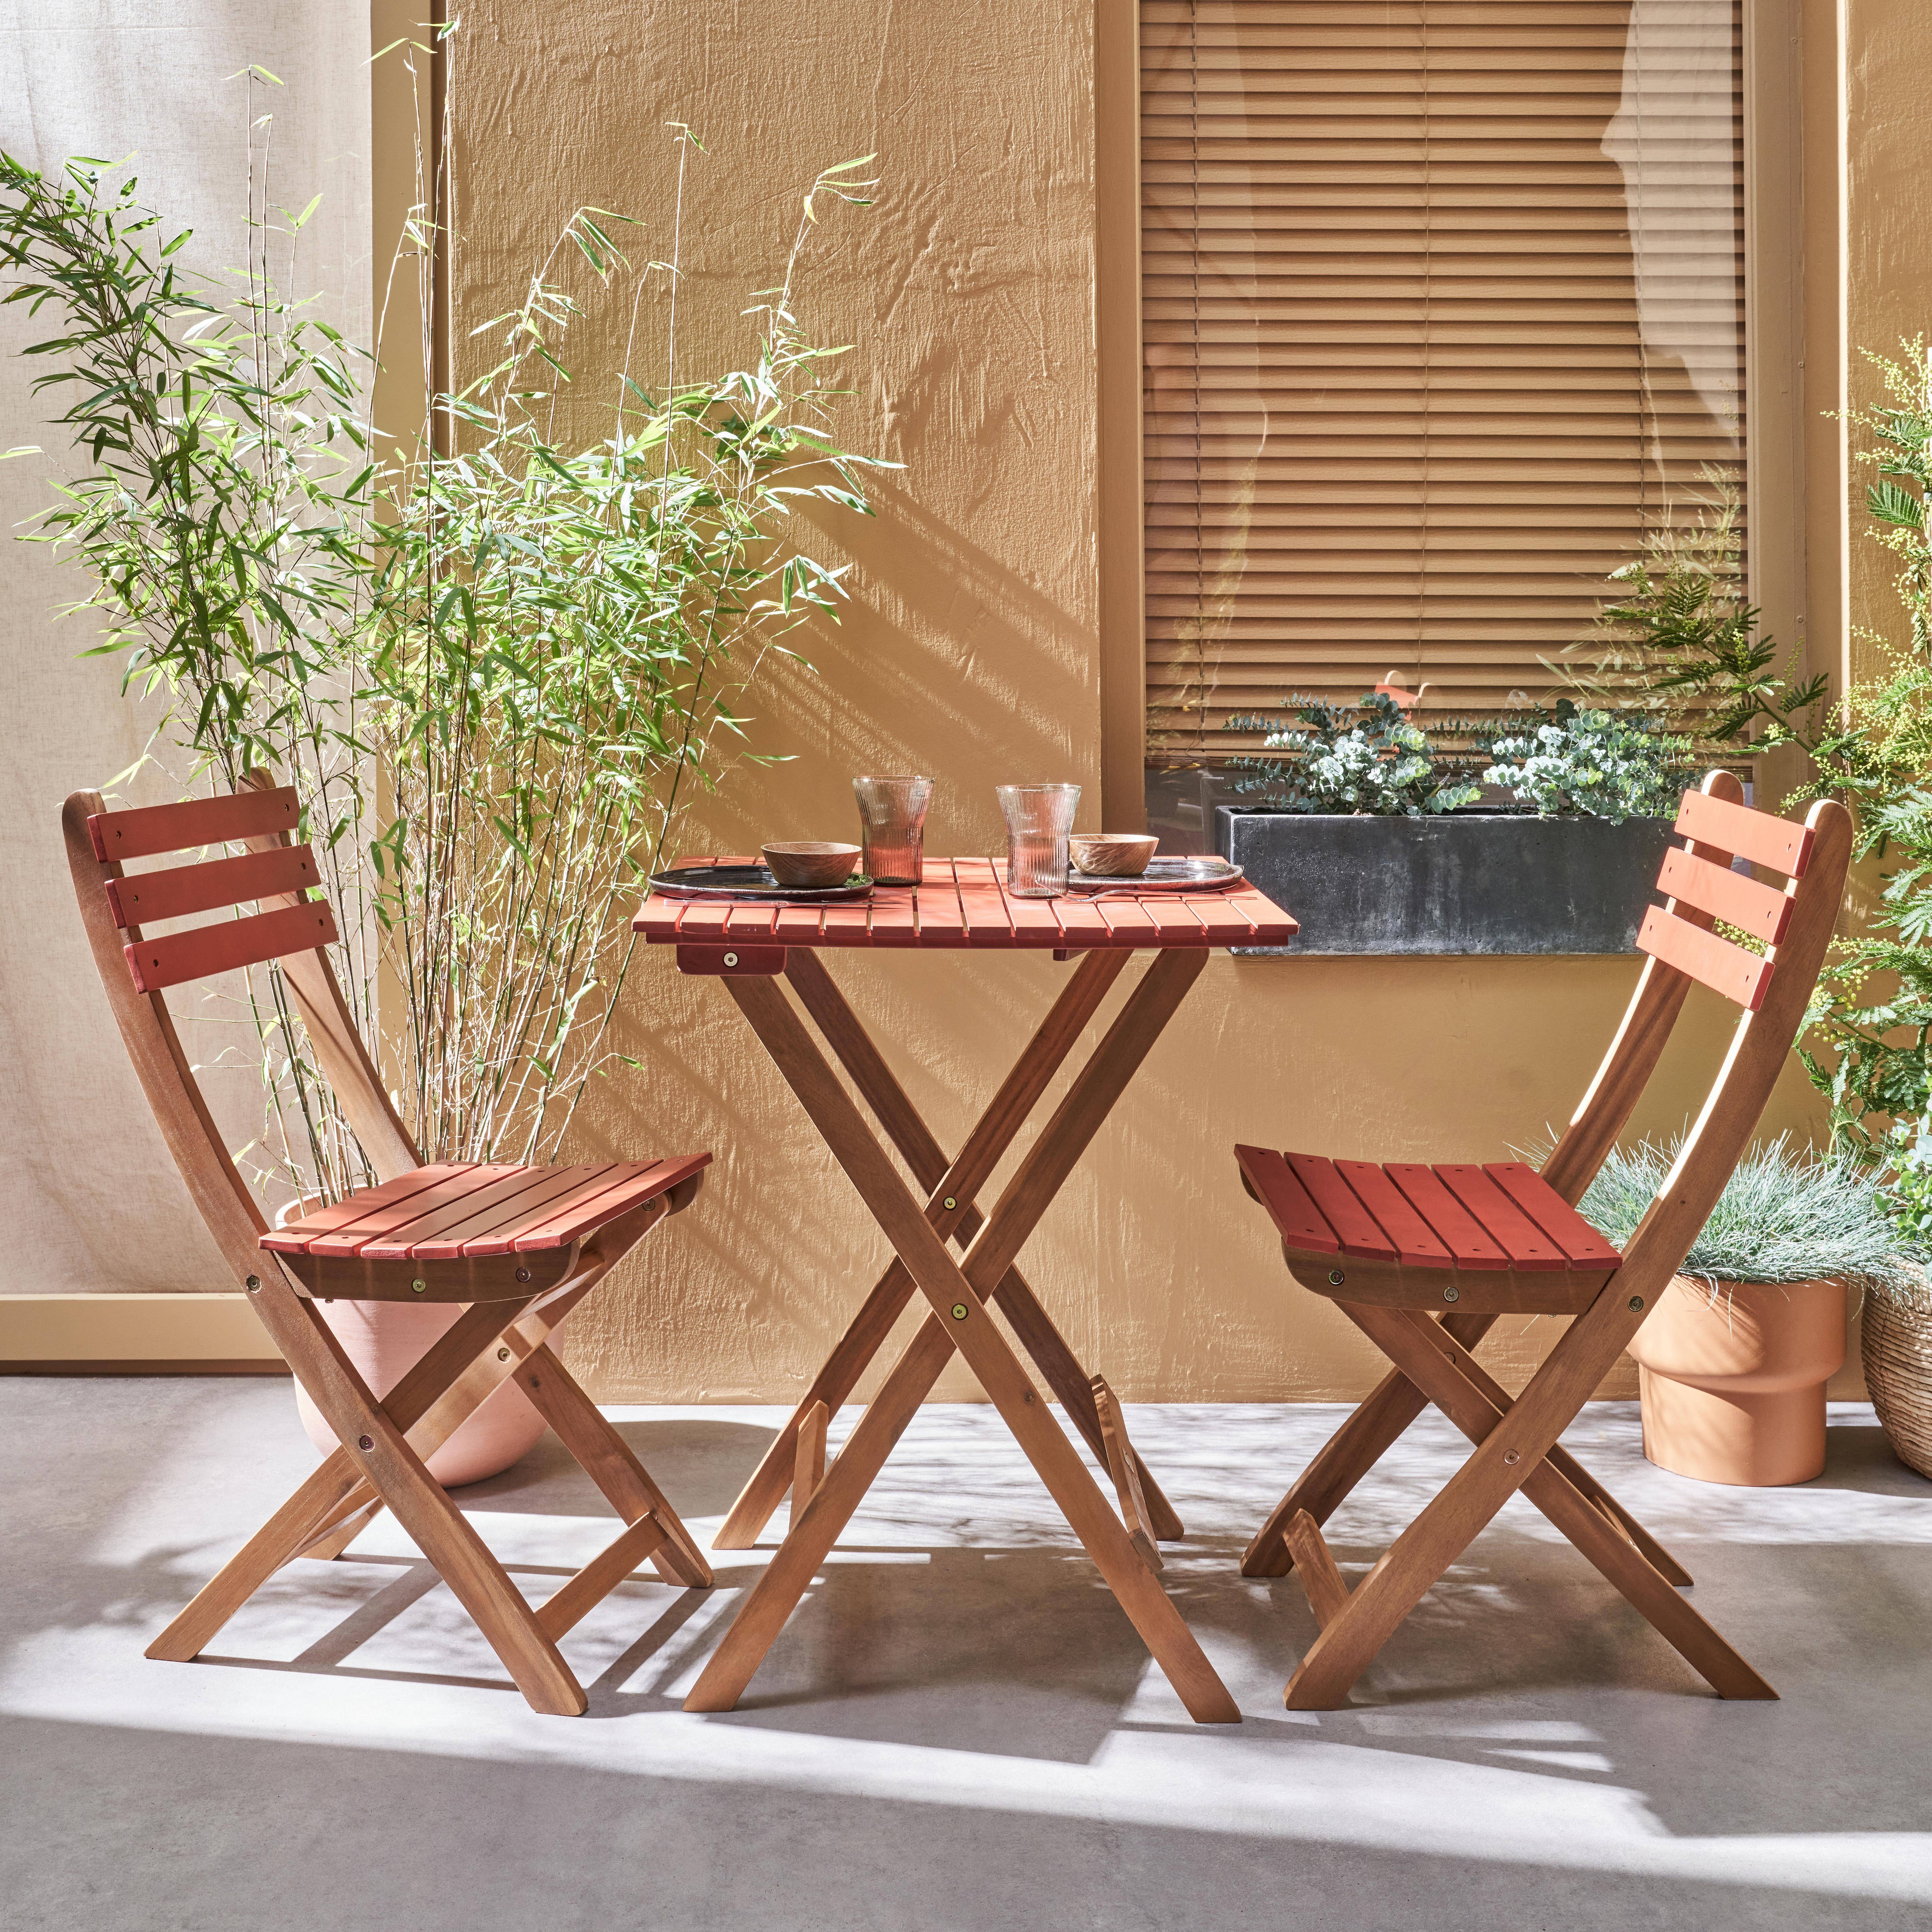 2-seater foldable wooden bistro garden table with chairs, 60x60cm - Barcelona - Terracotta Photo1